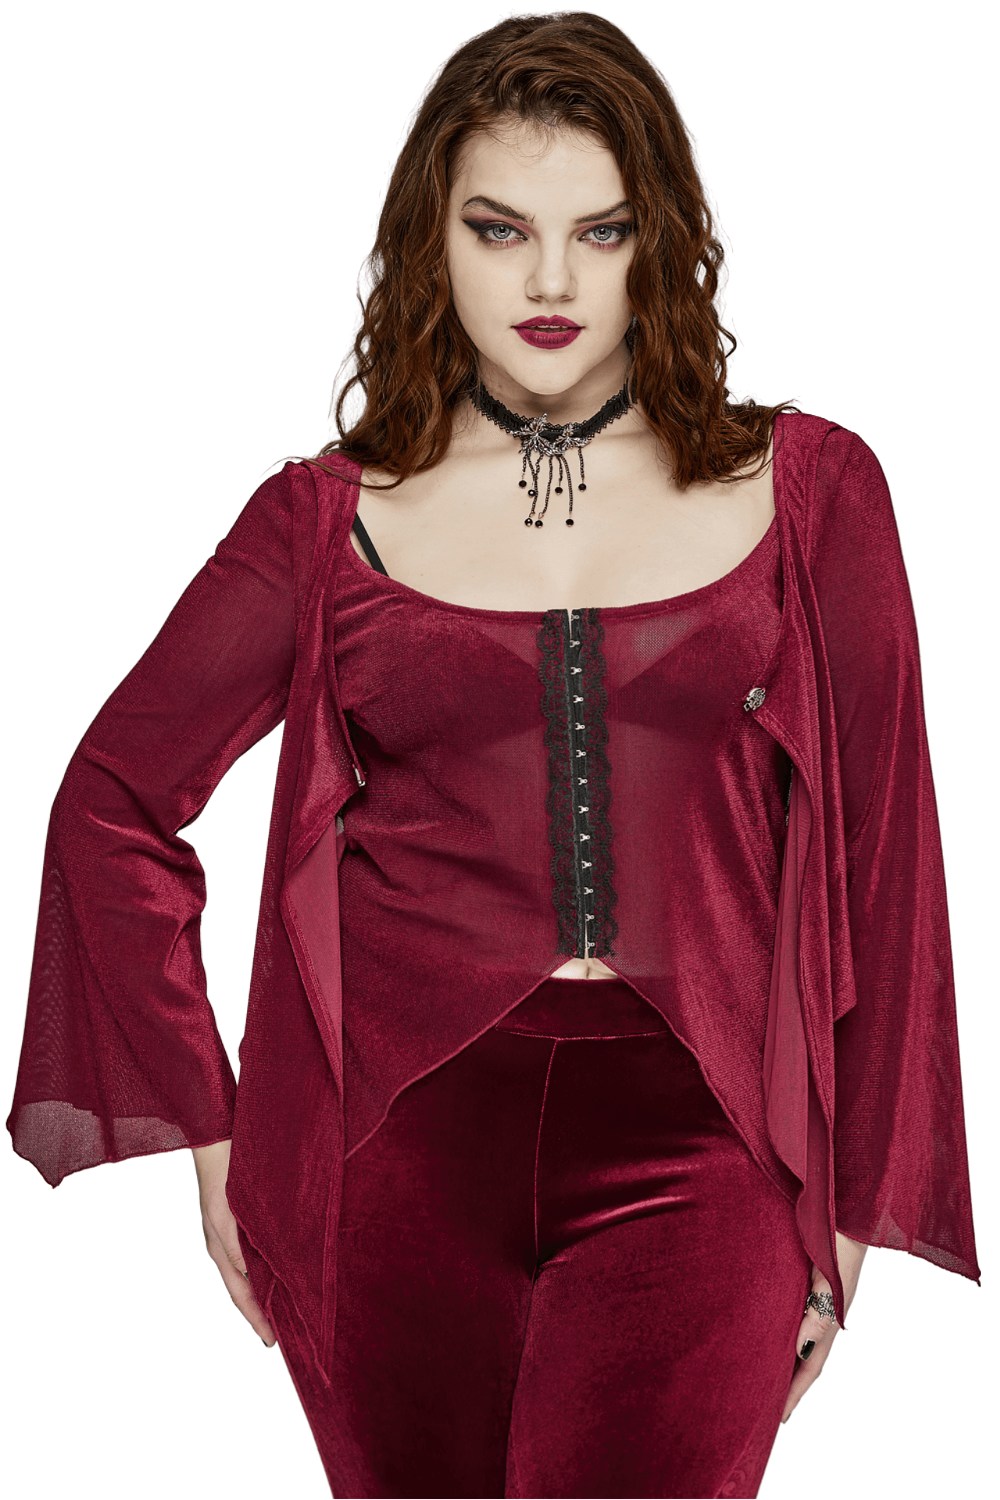 Edgy Gothic Elastic Mesh Two-Piece Top with Hooks